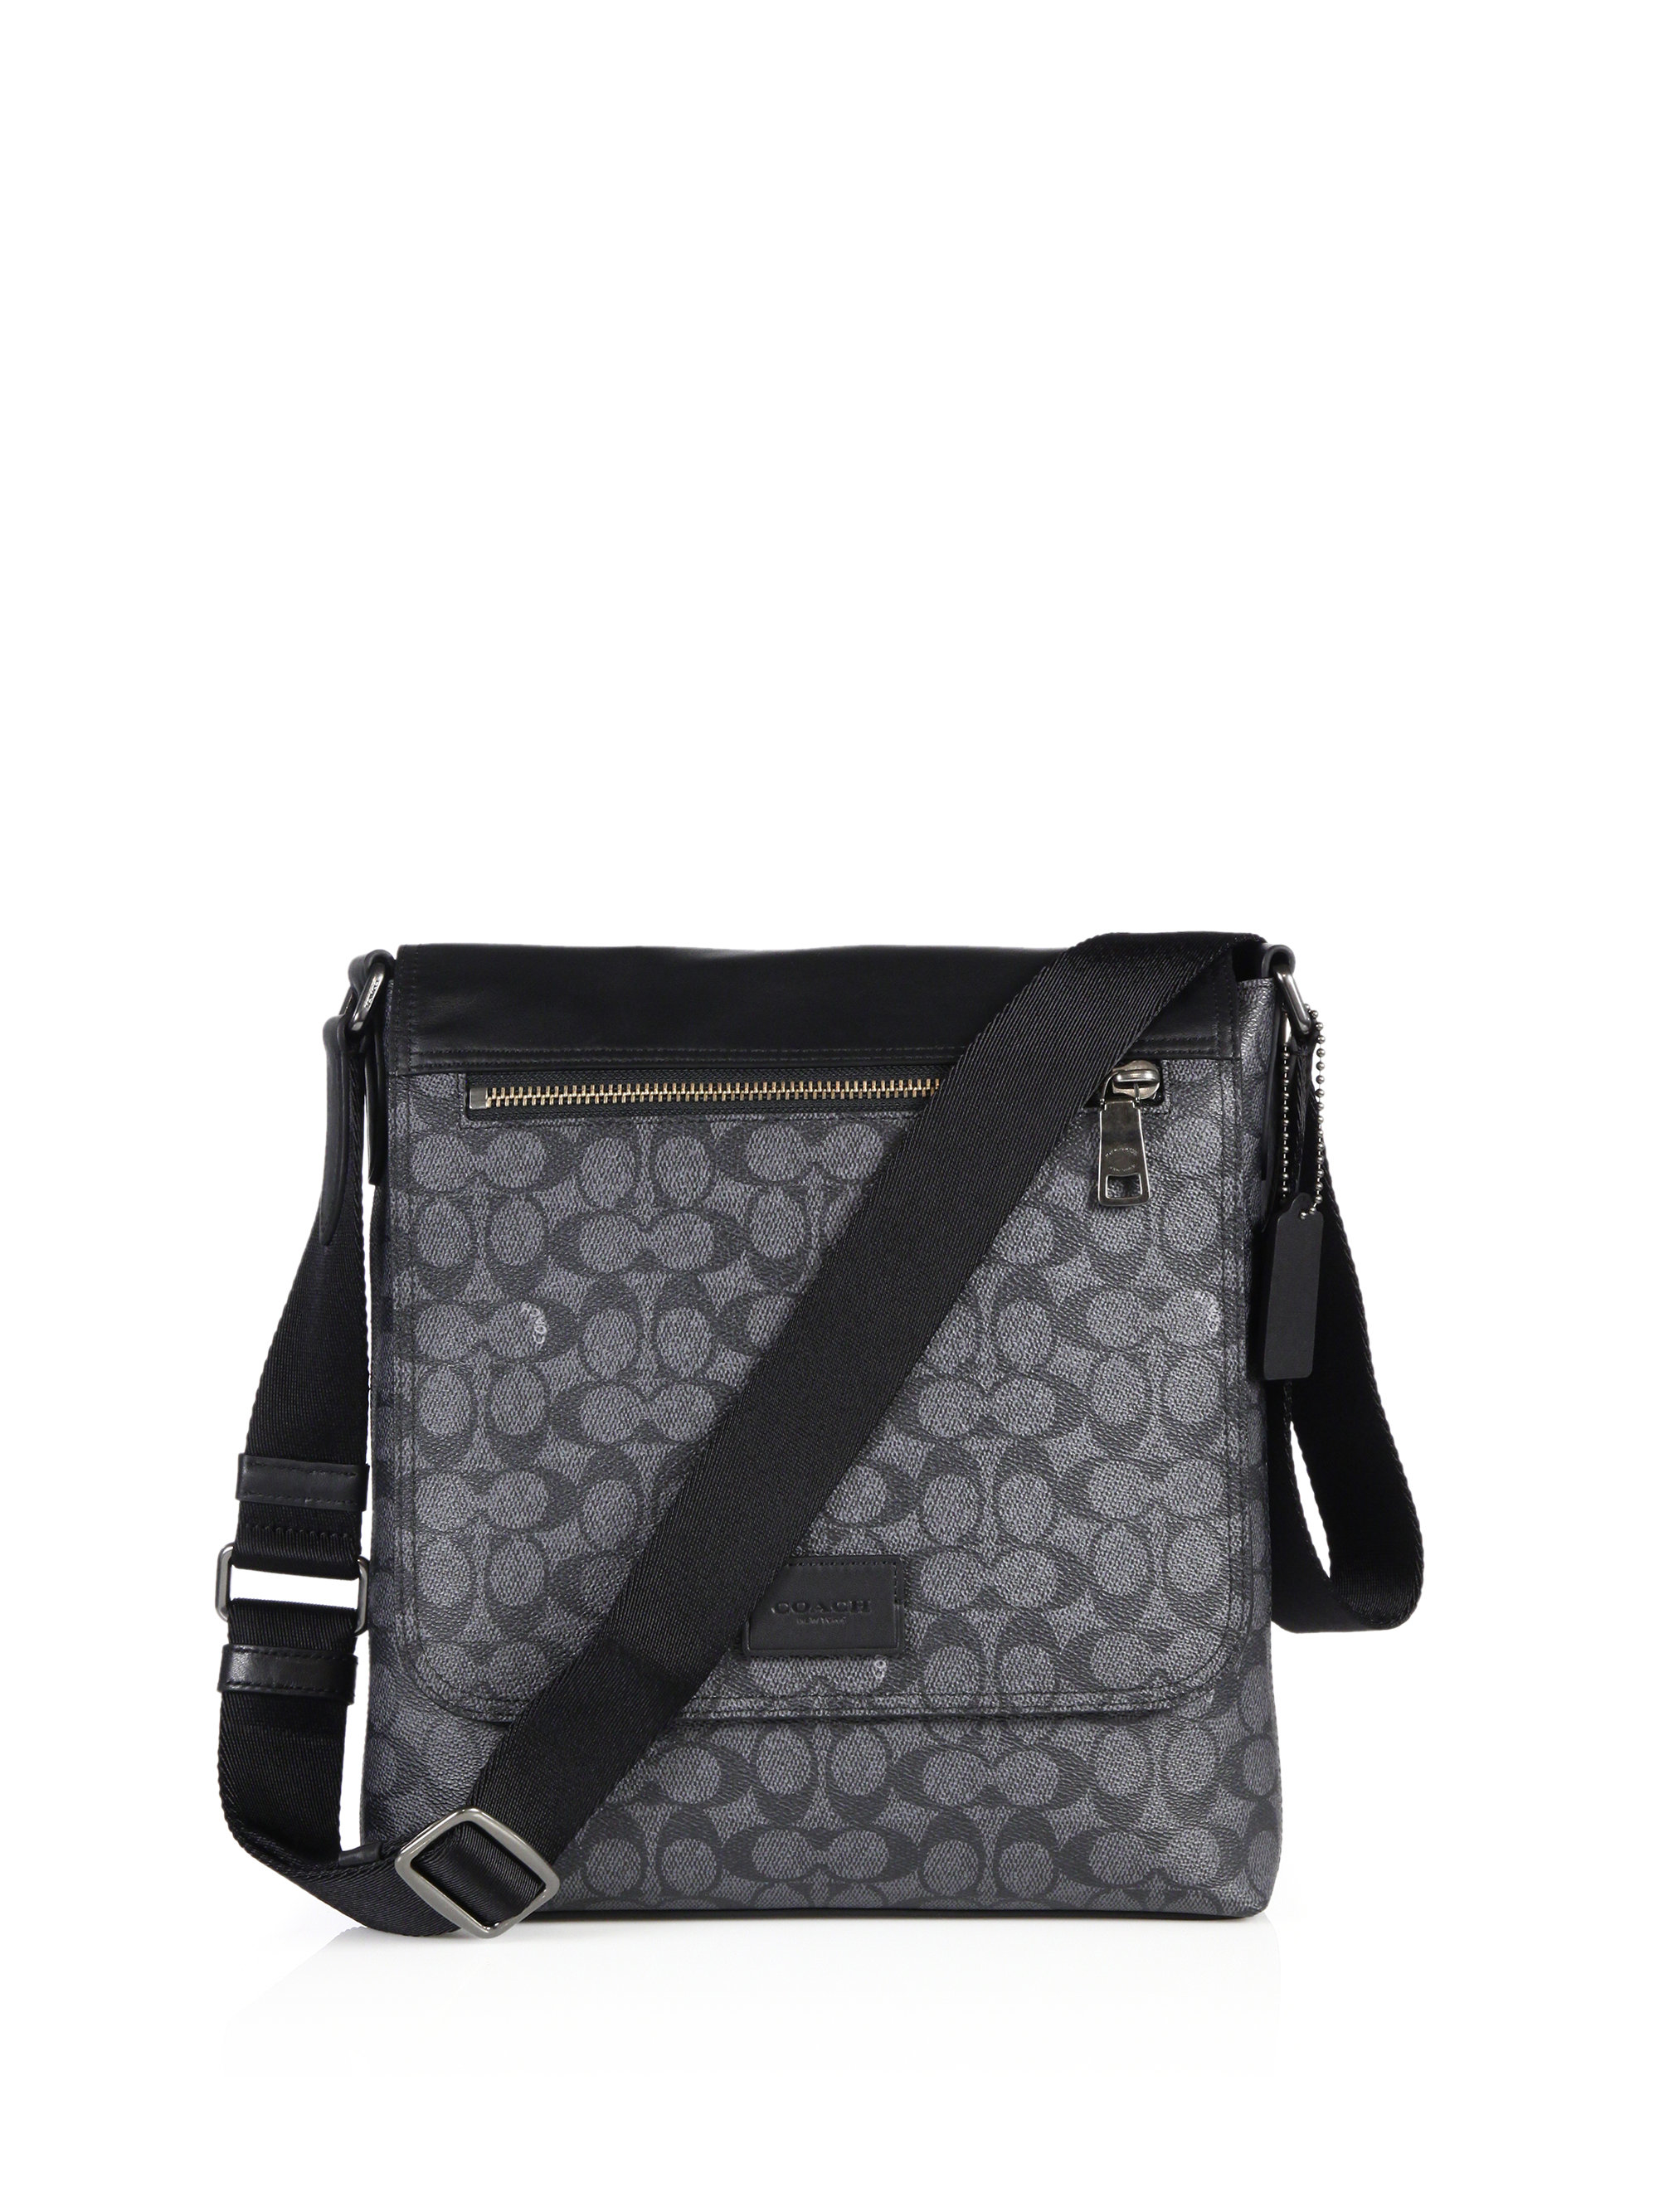 Lyst - COACH Sam Leather-trimmed Coated Canvas Crossbody Bag in Black for Men